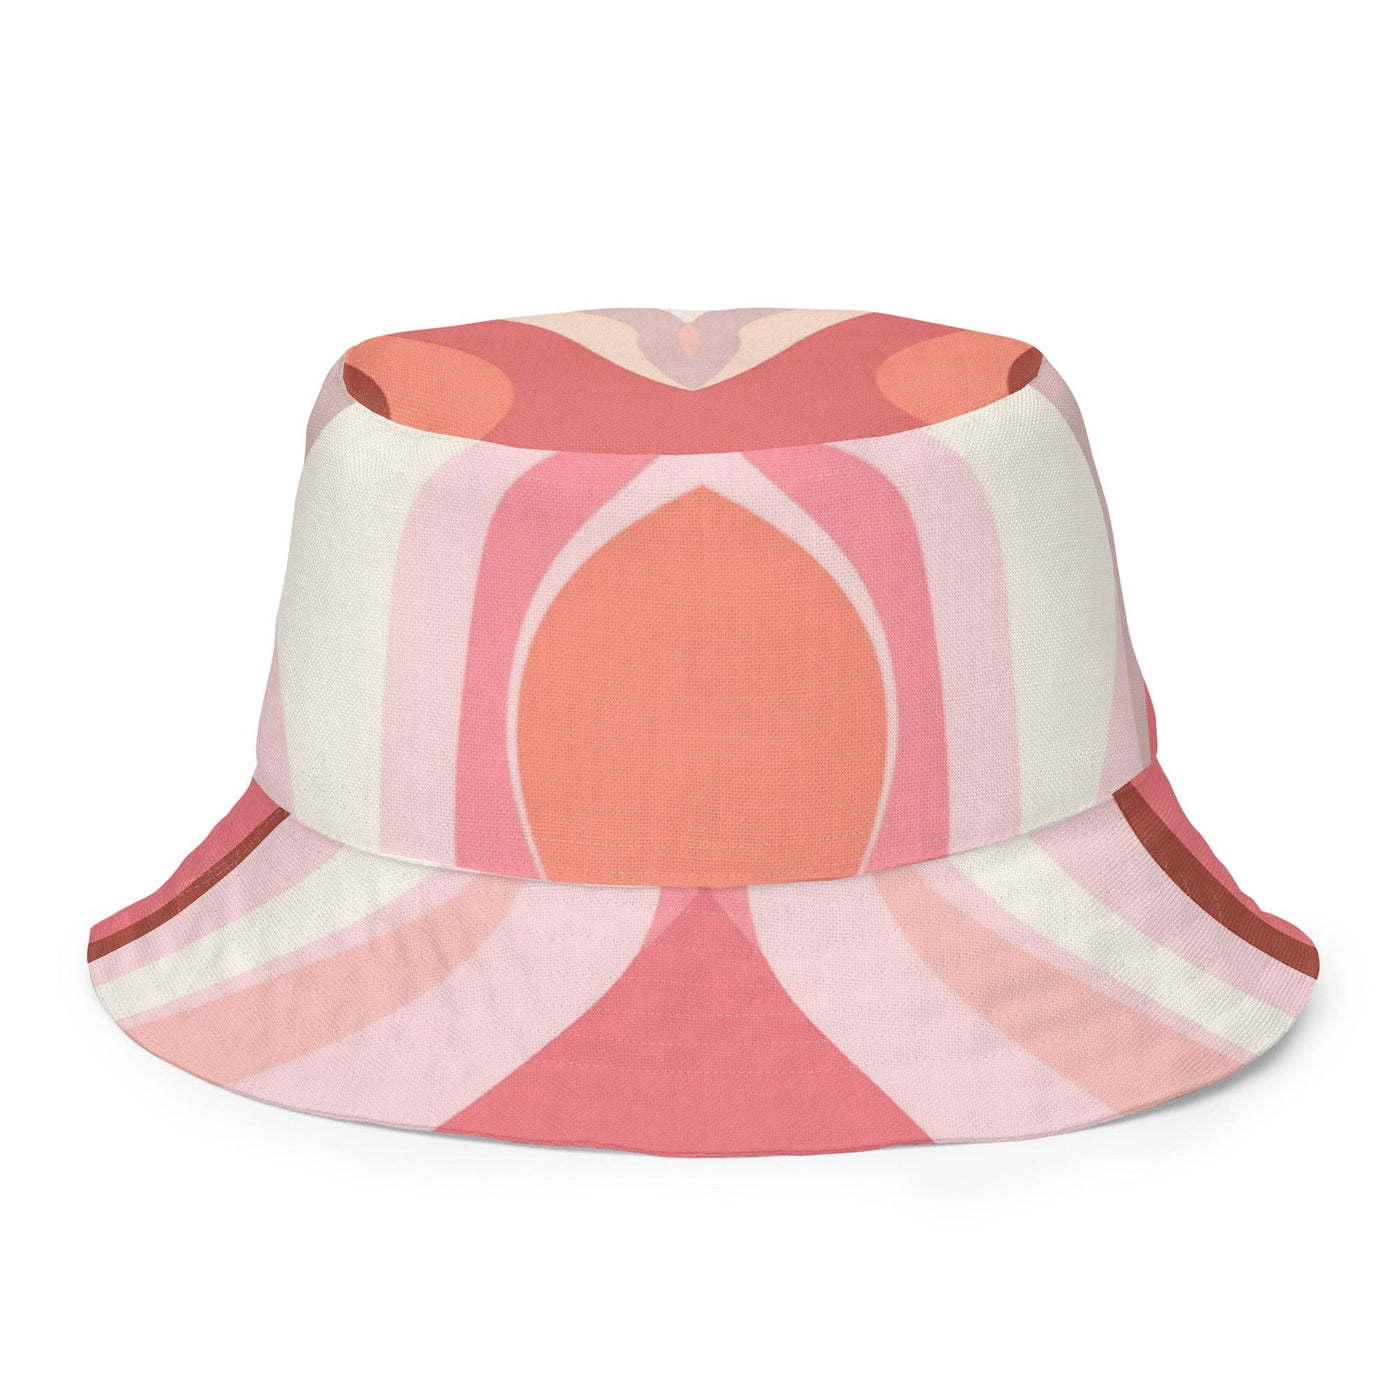 Reversible Bucket Hat Boho Pink And White Contemporary Art Lined - Unisex